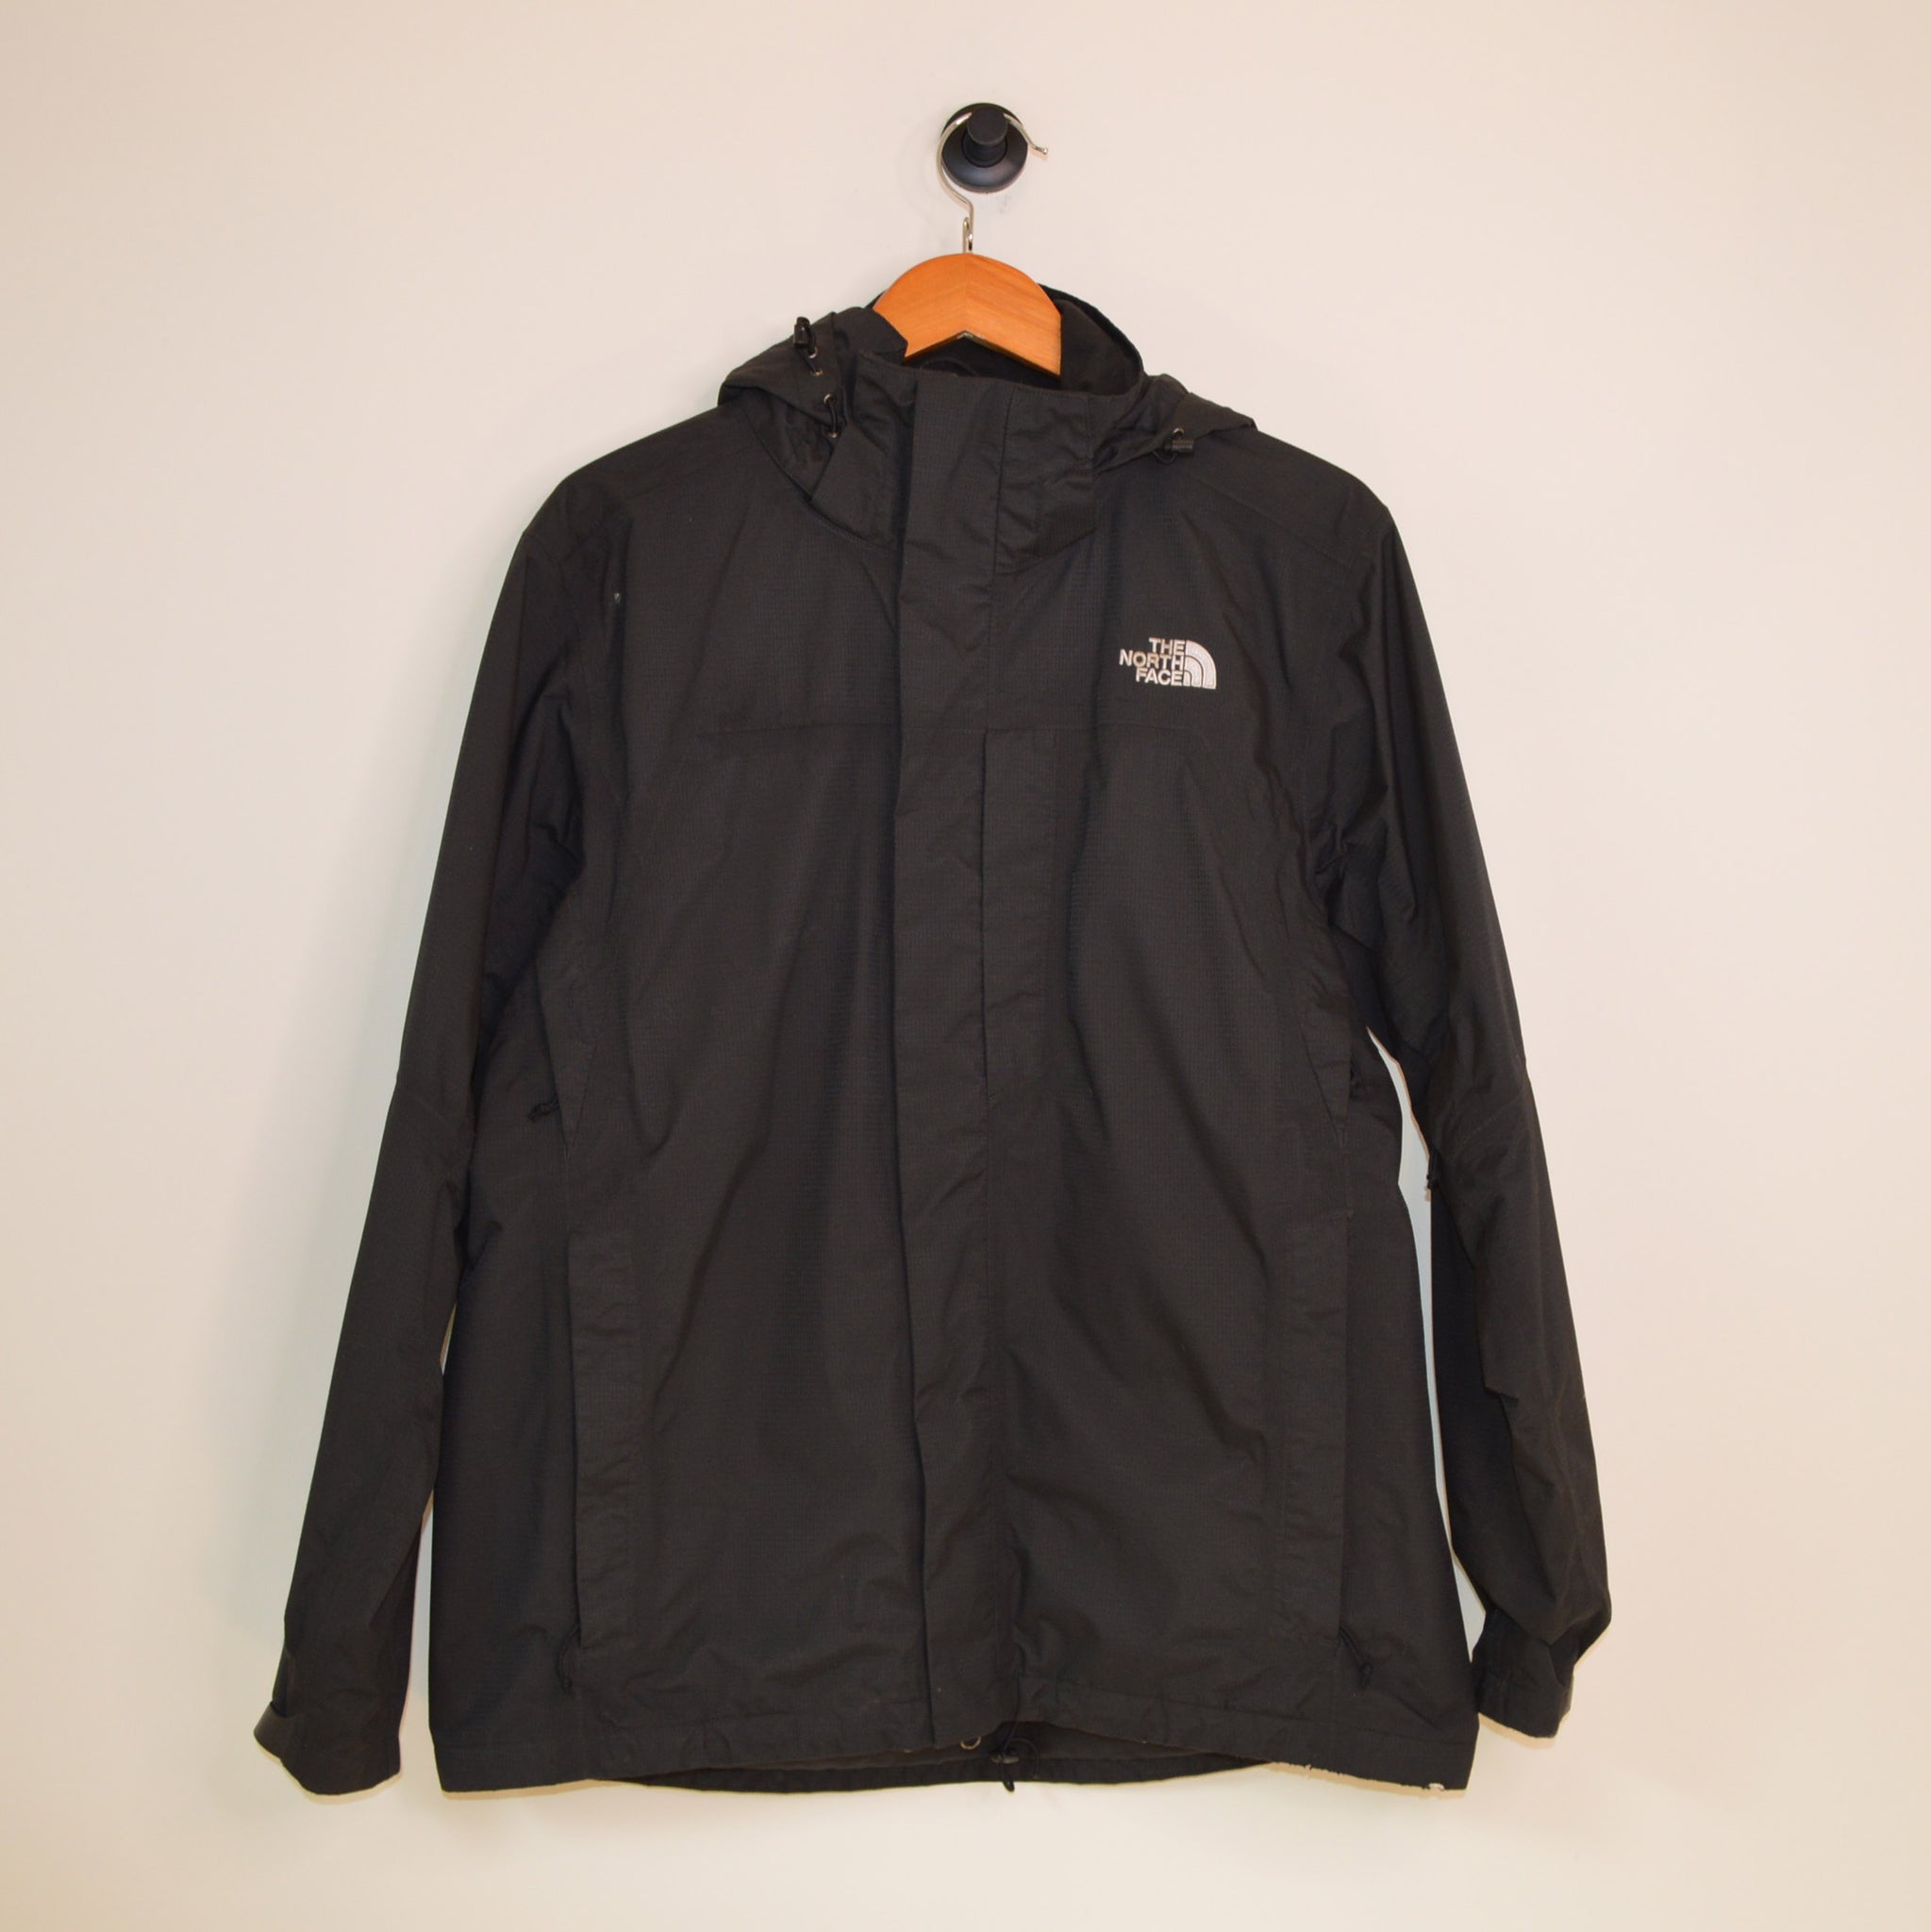 The North Face Hyvent TriClimate Jacket [L] – Spicy Dye